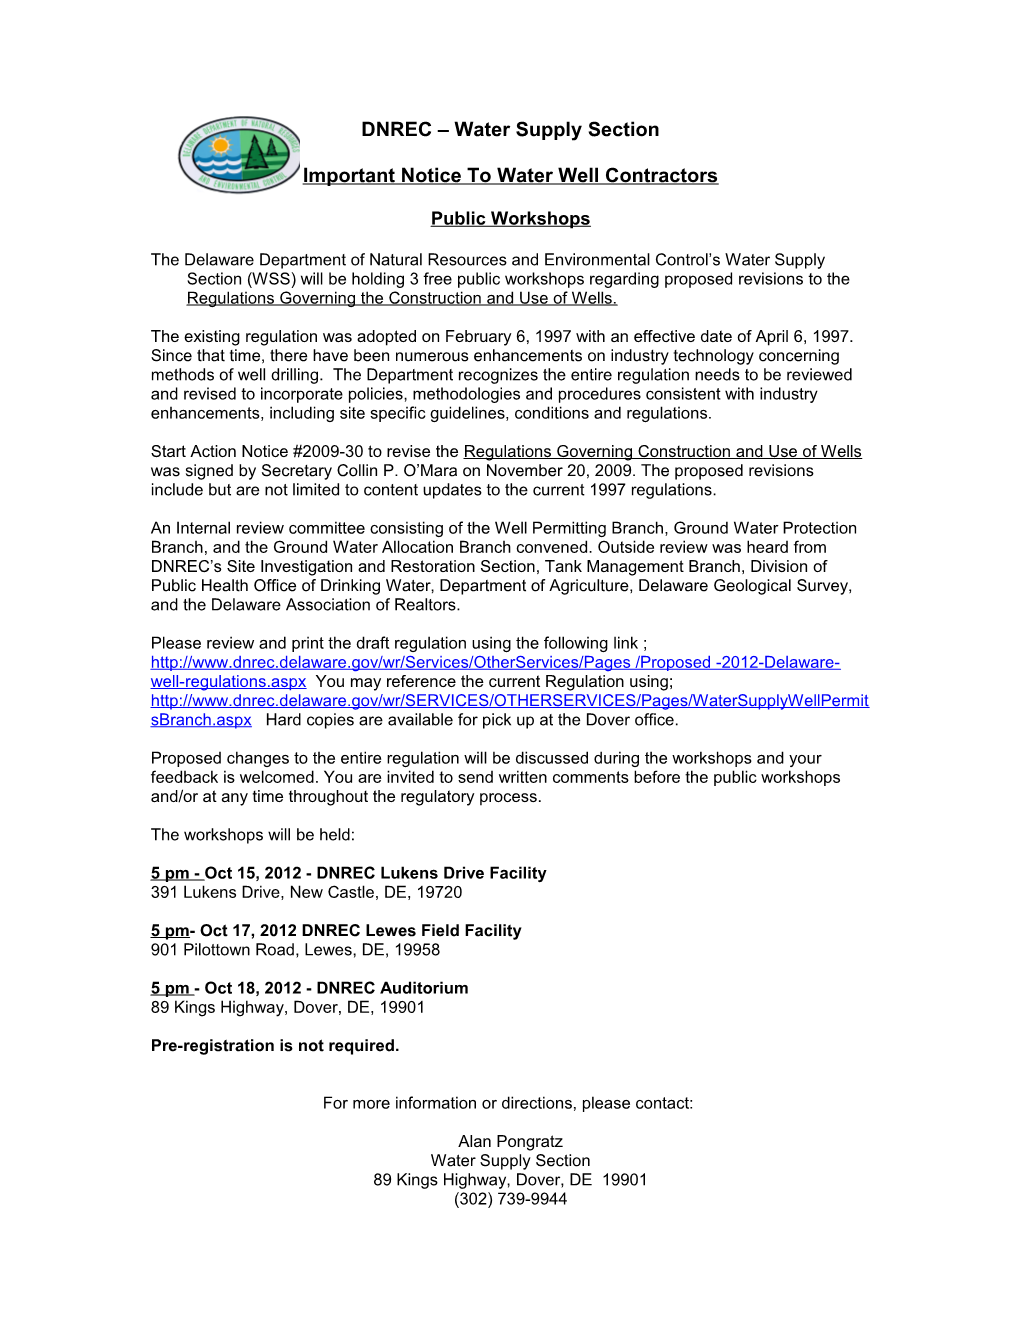 DNREC Water Supply Section